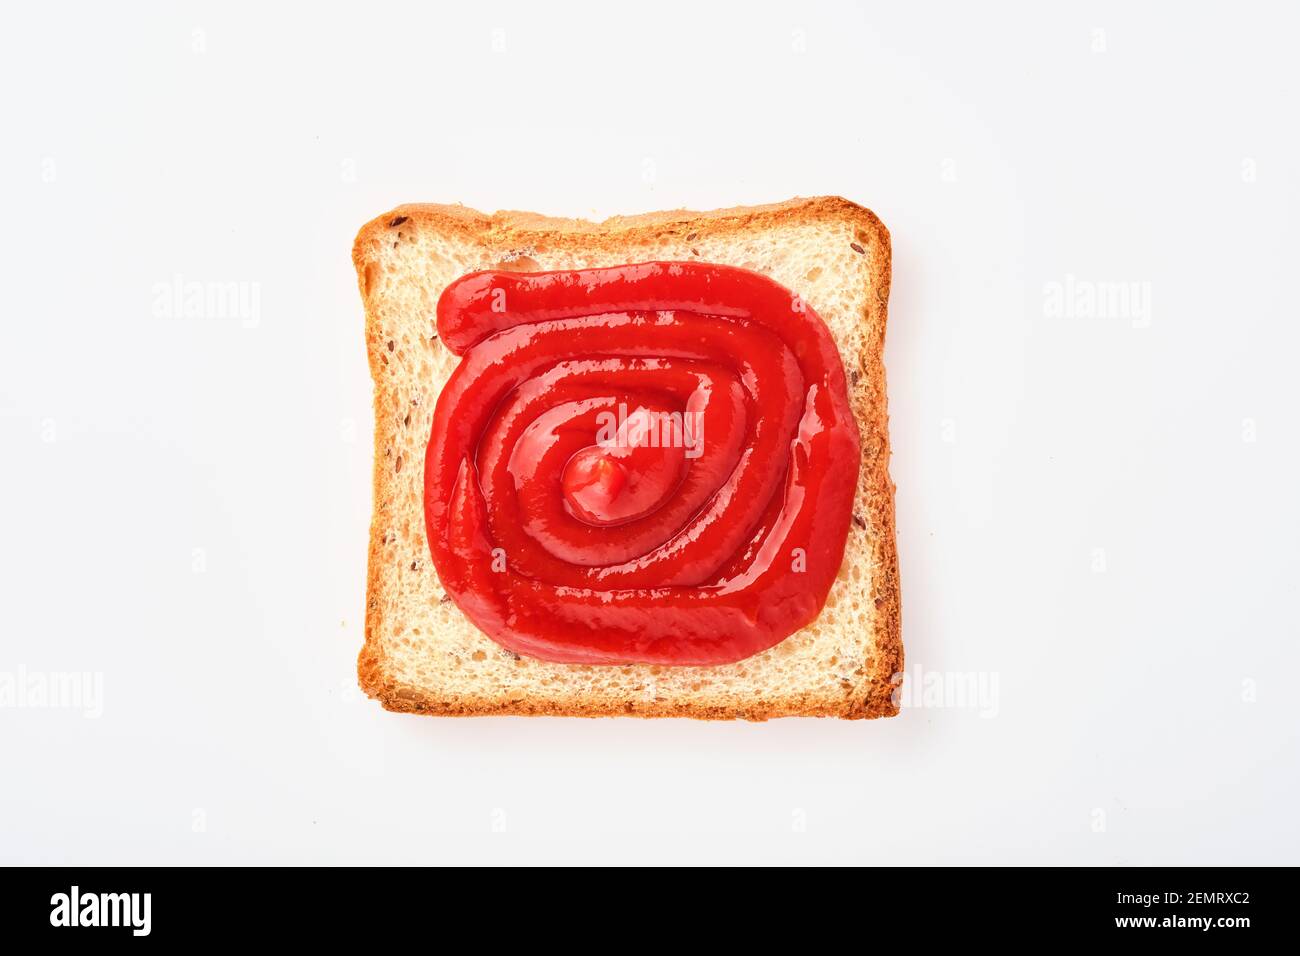 Bread slice with ketchup isolated on white. Slice of multigrain bread square form plaster tomatoes sauce for toast. Top view or flat lay. Stock Photo